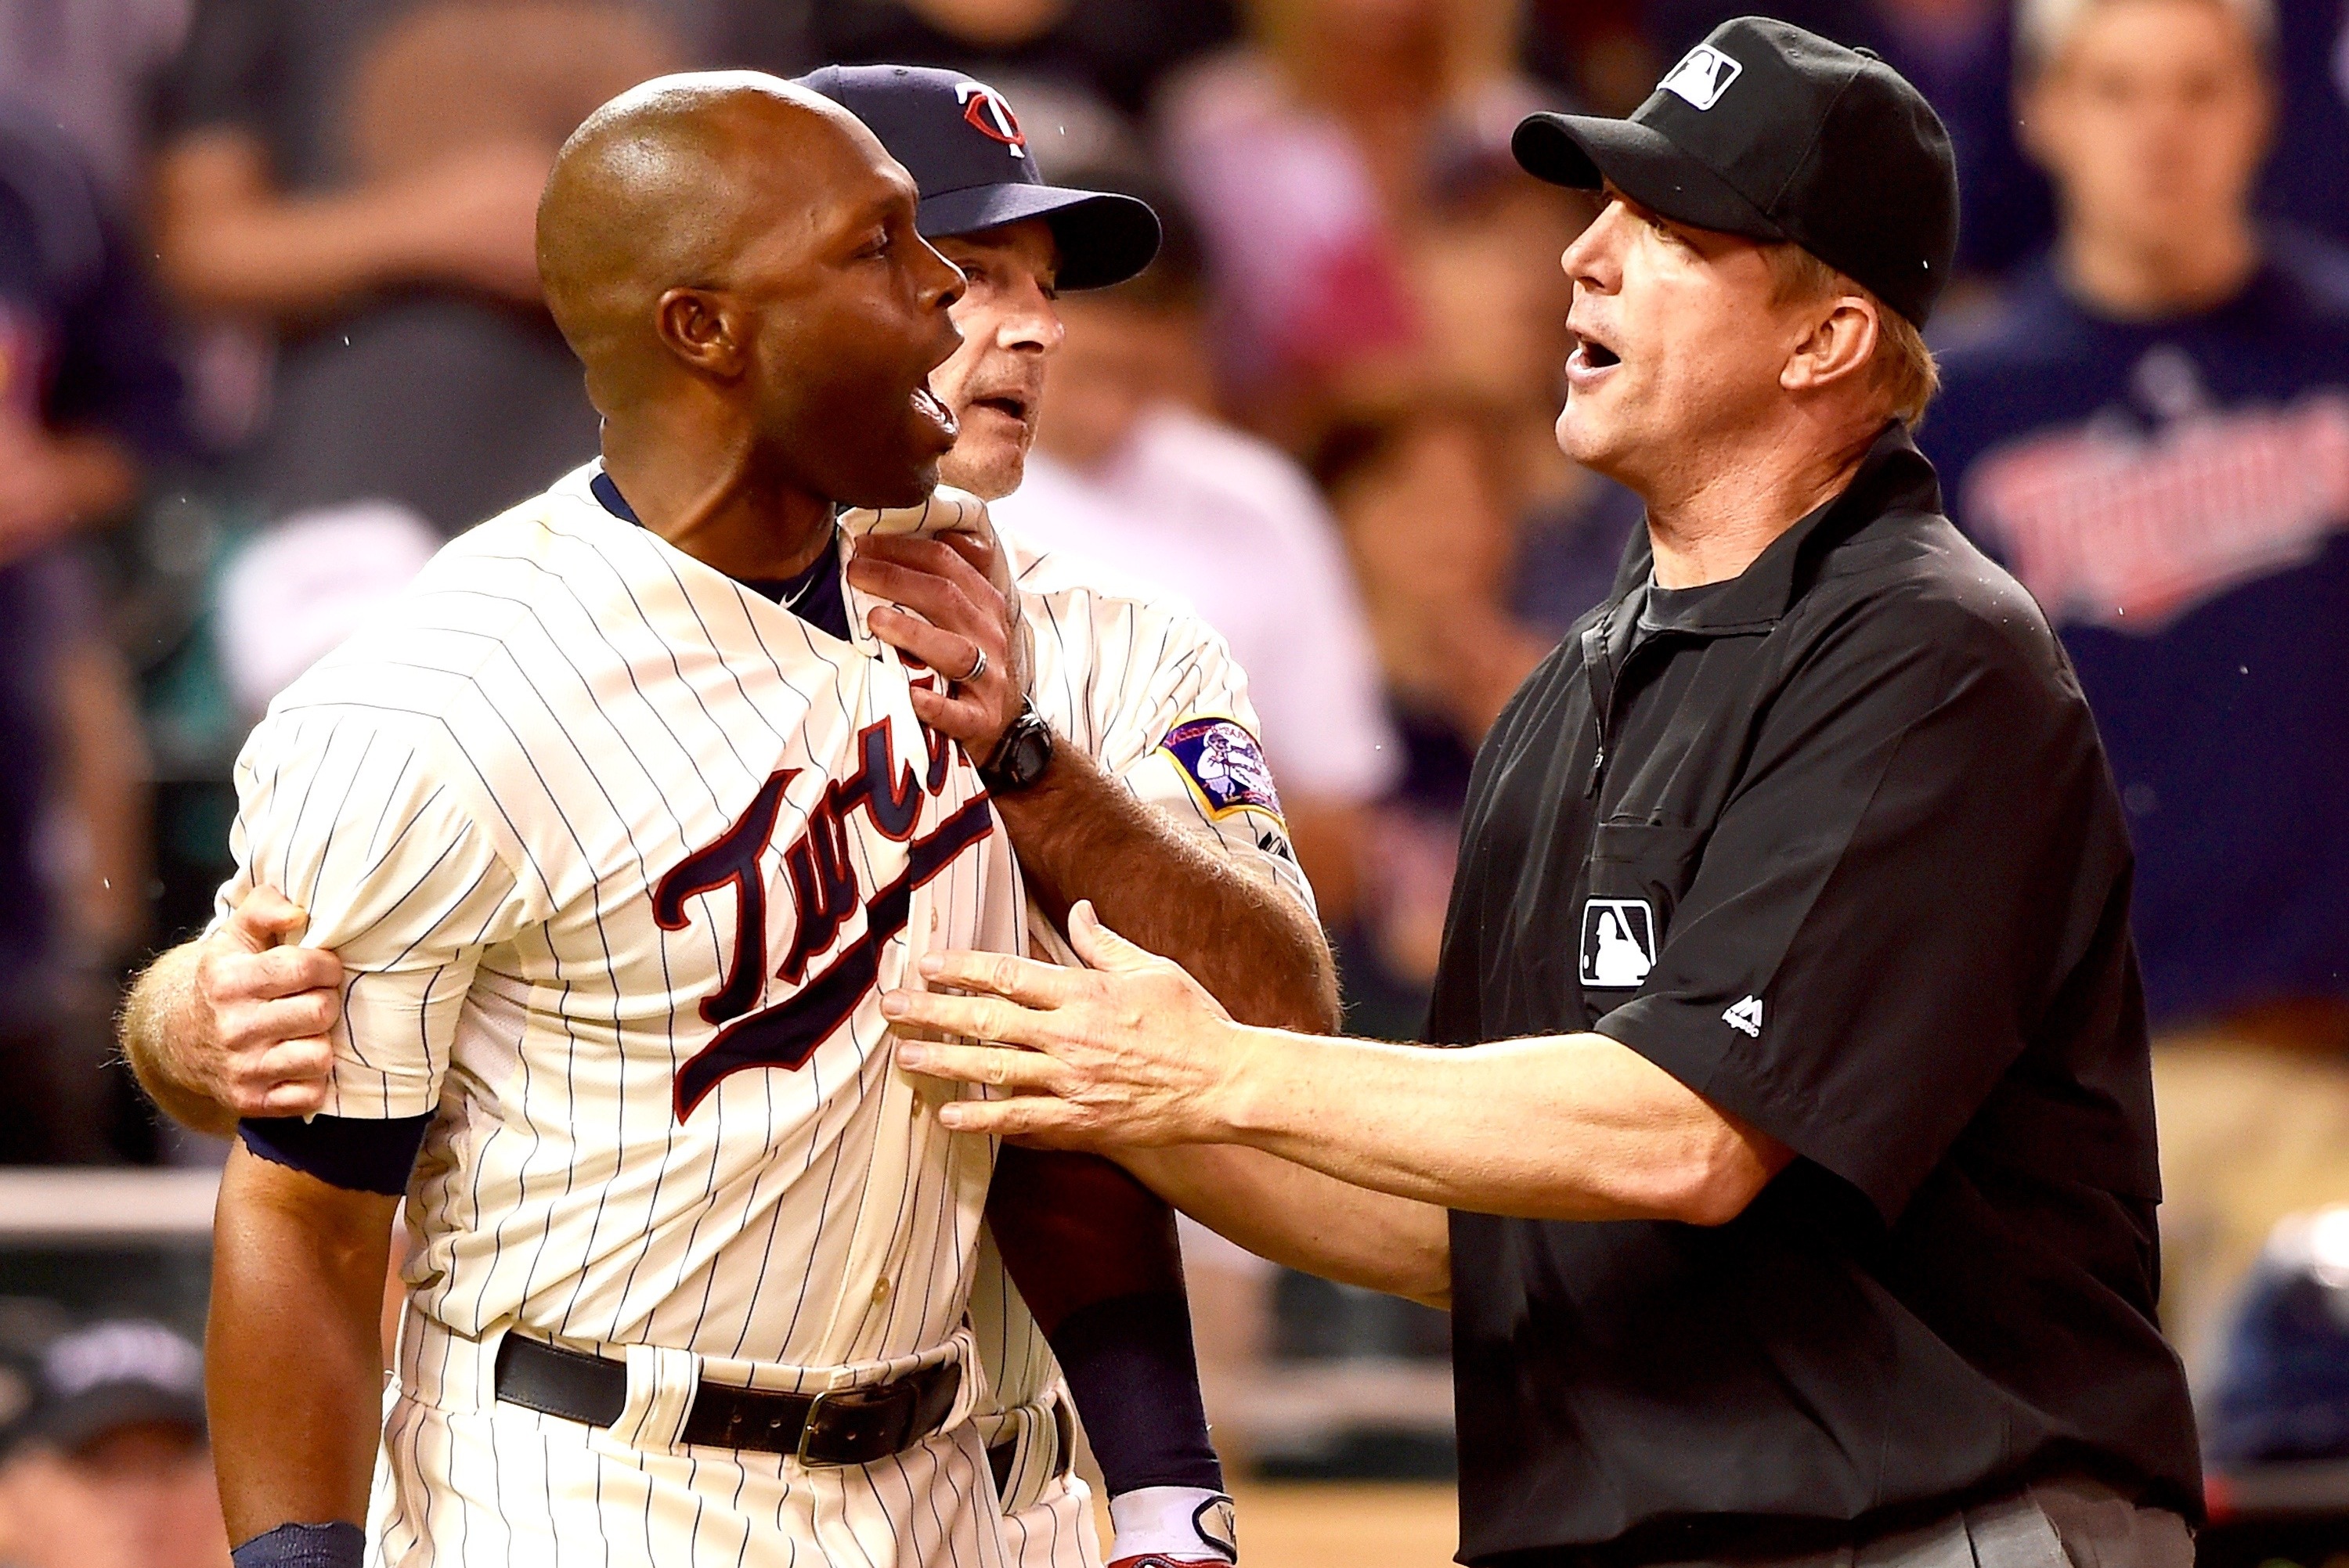 Report: MLB to review incident between Torii Hunter and umpire